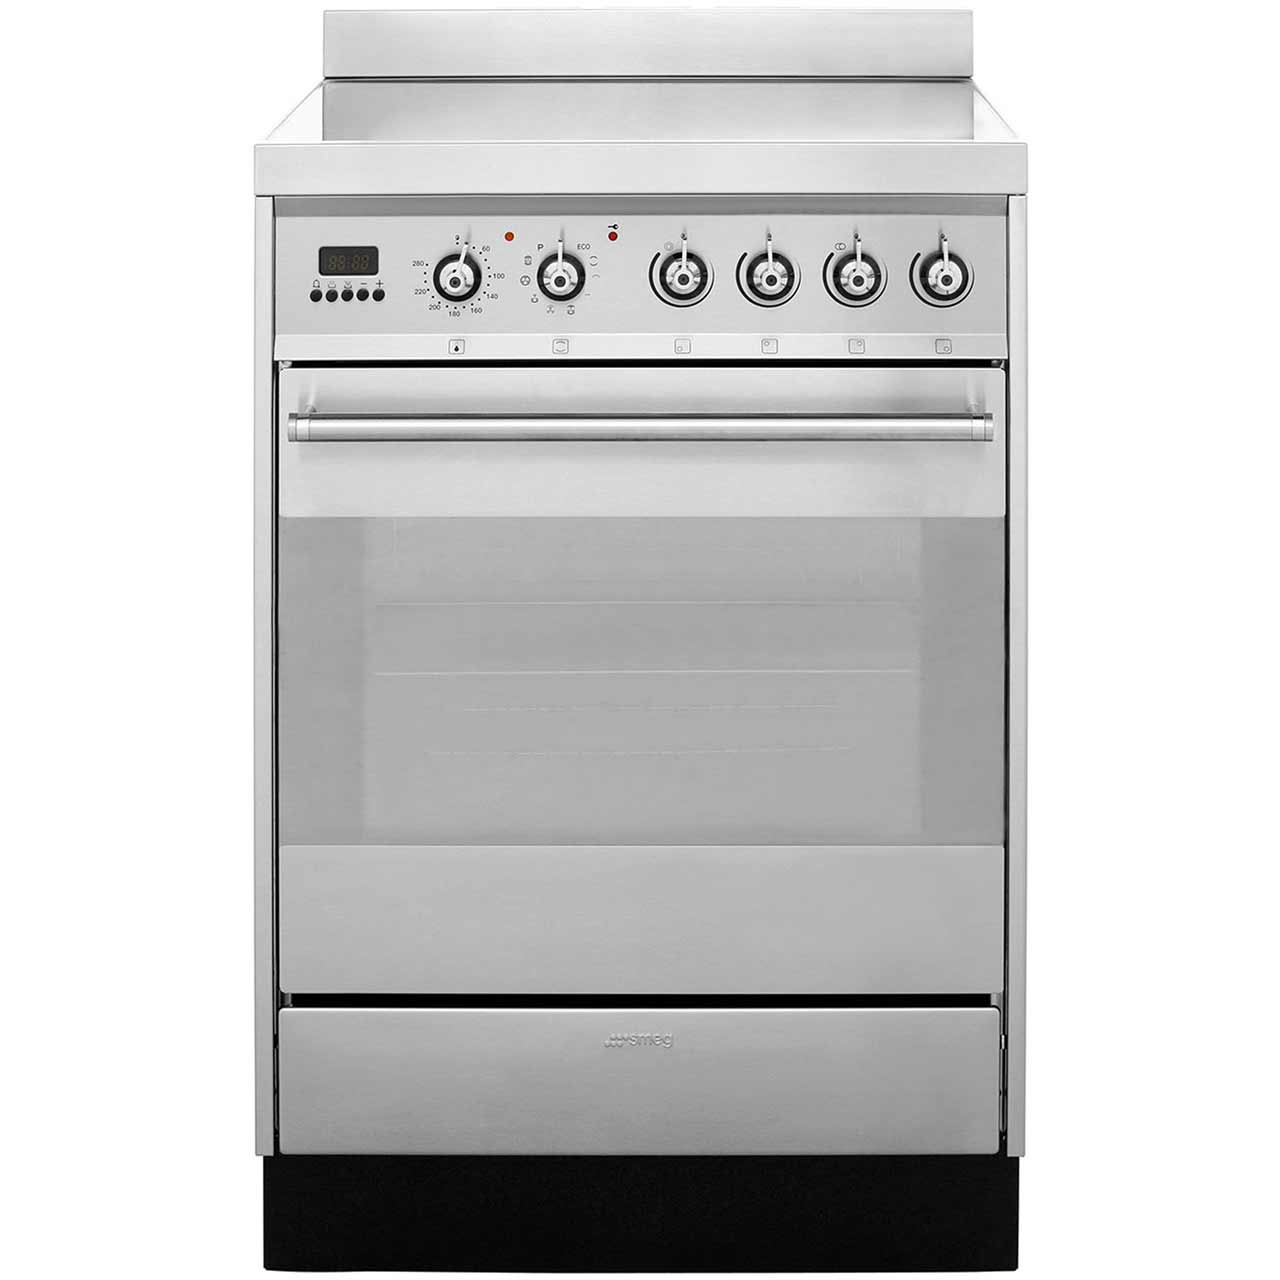 Smeg Symphony SY6CPX8 Free Standing Cooker in Stainless Steel